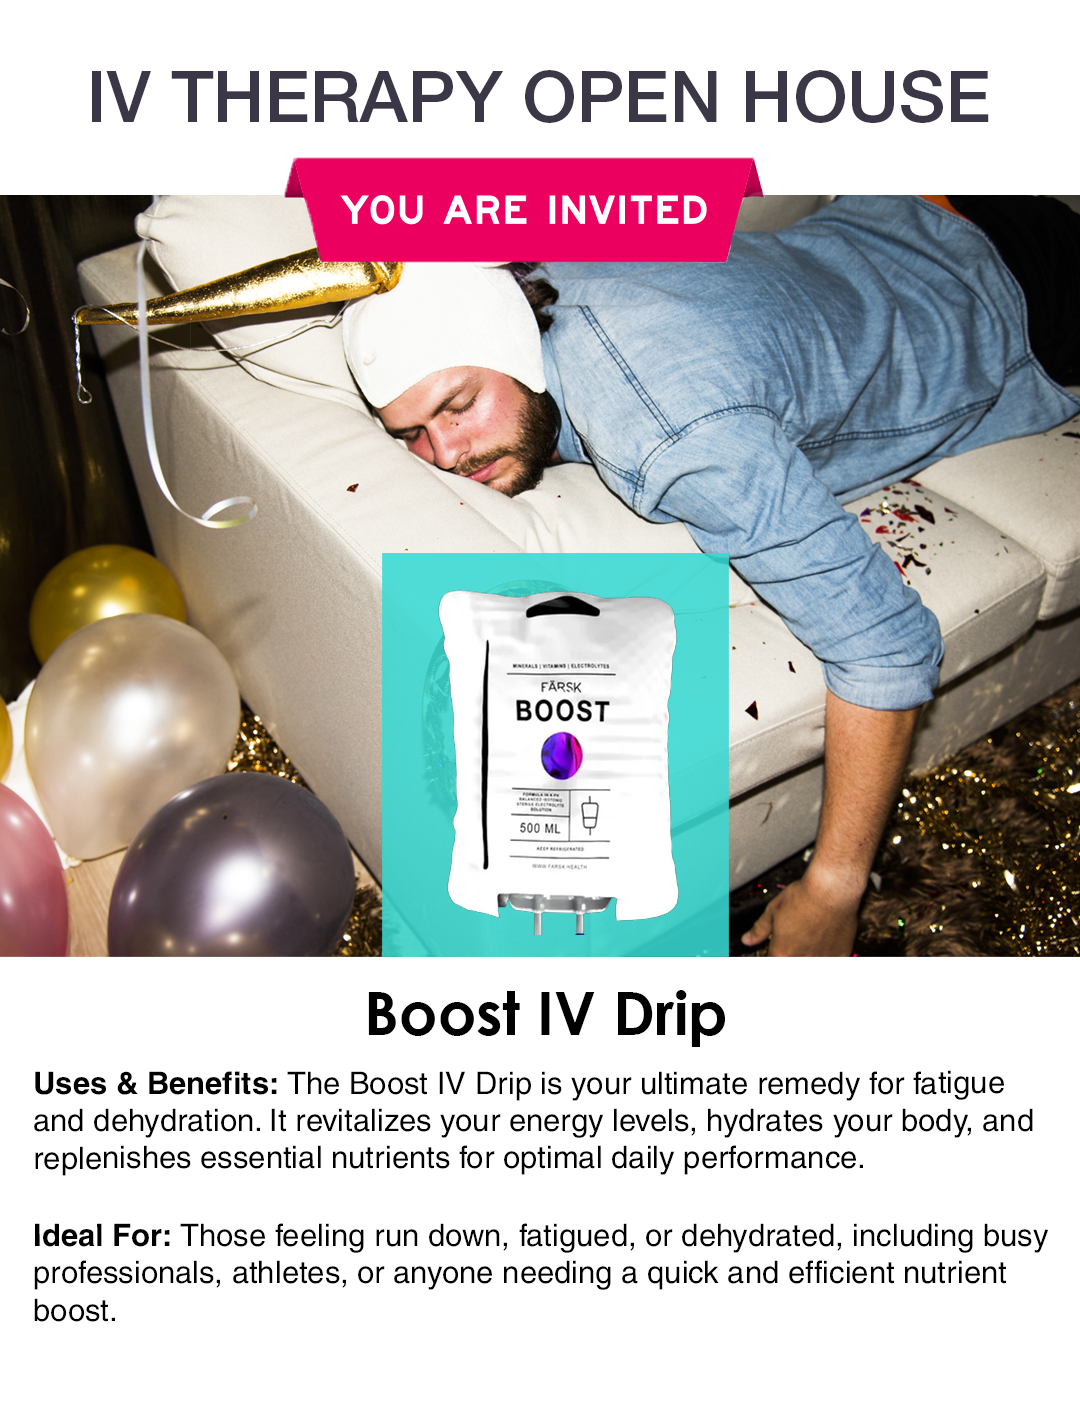 Boost IV Drip treatment at The Lip Doctor for energy revitalization and hydration